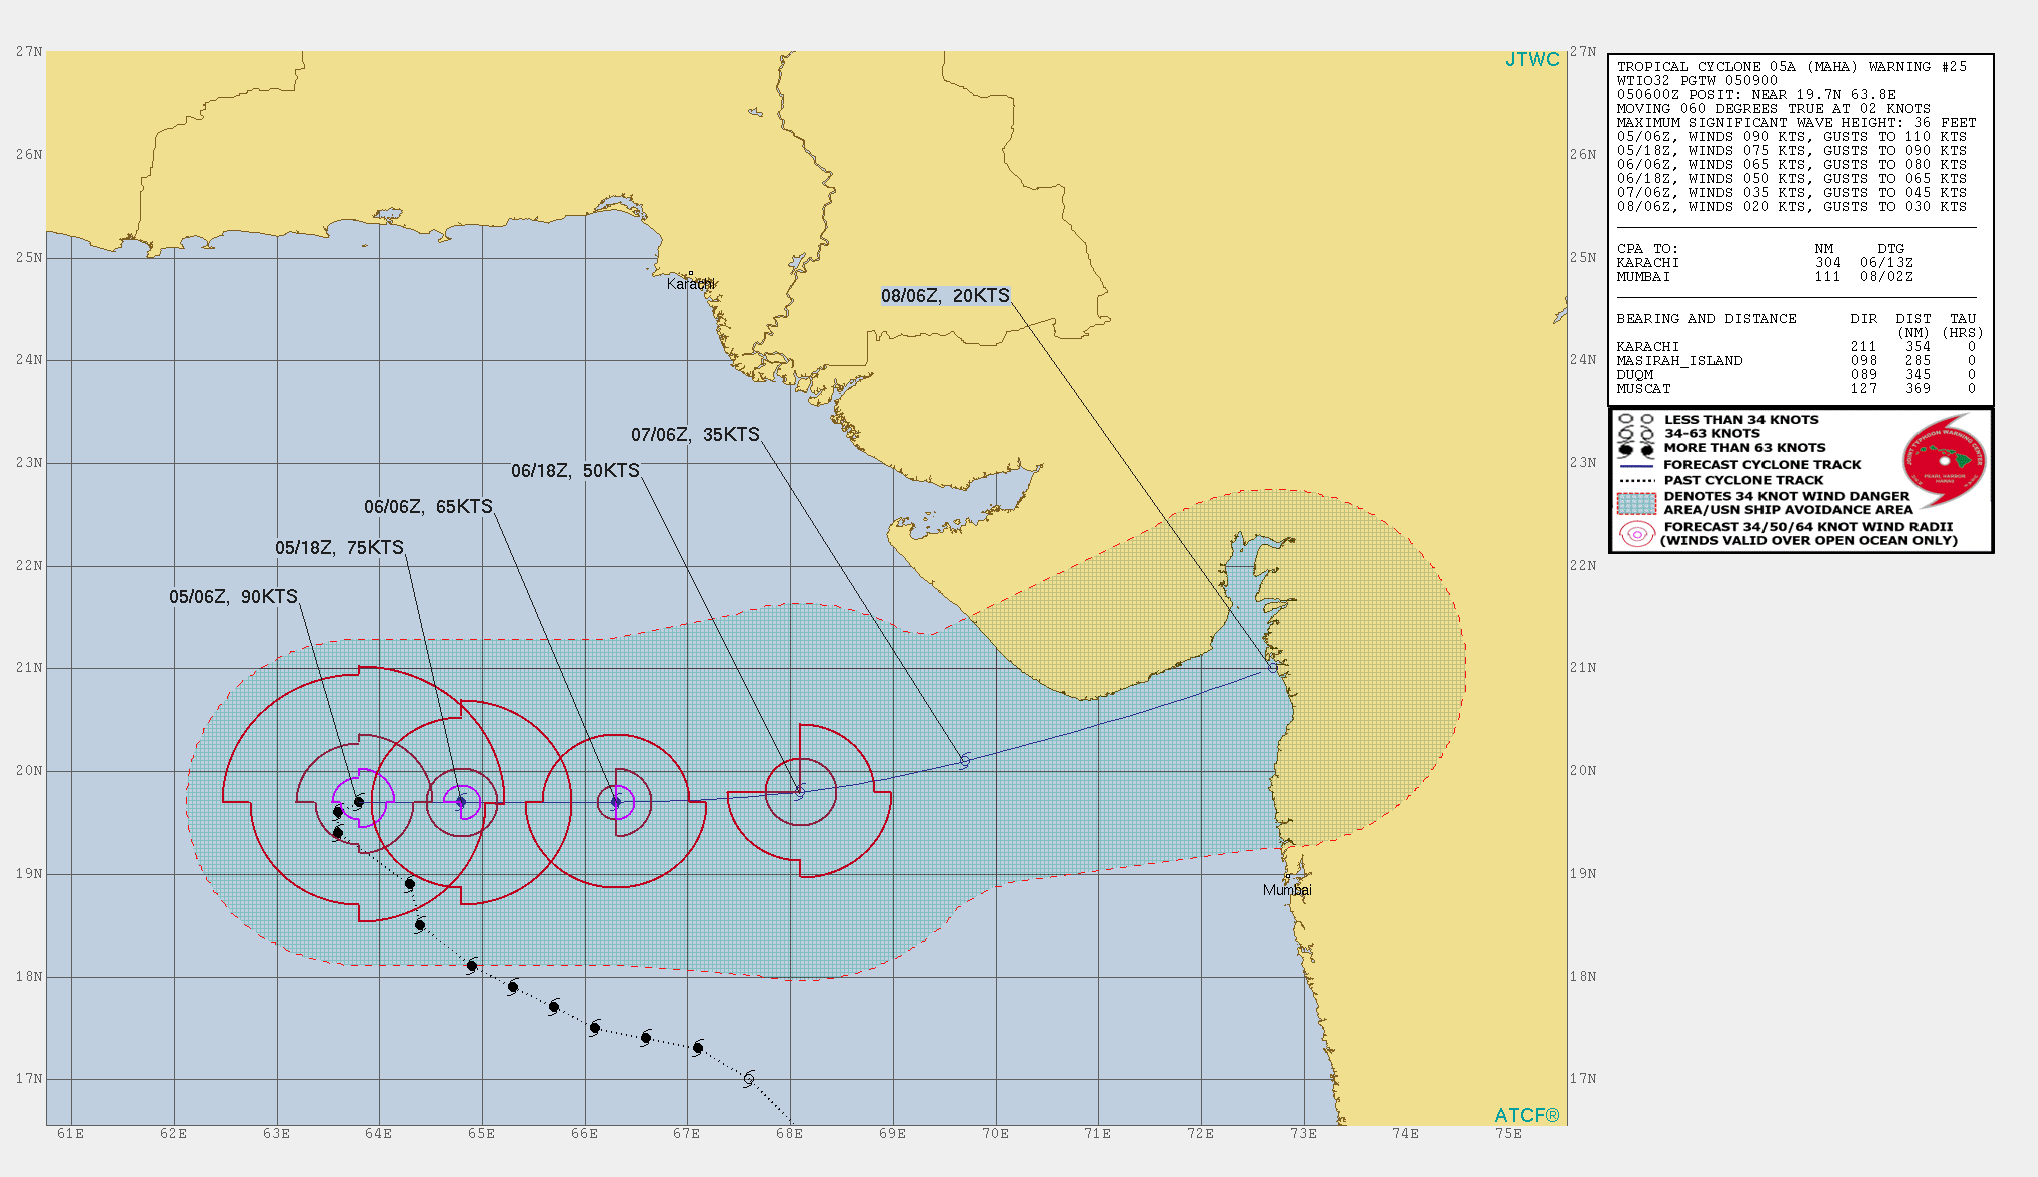 TC 05A: WEAKENING, INTENSITY FORECAST TO BE BELOW 65KTS AFTER 24H